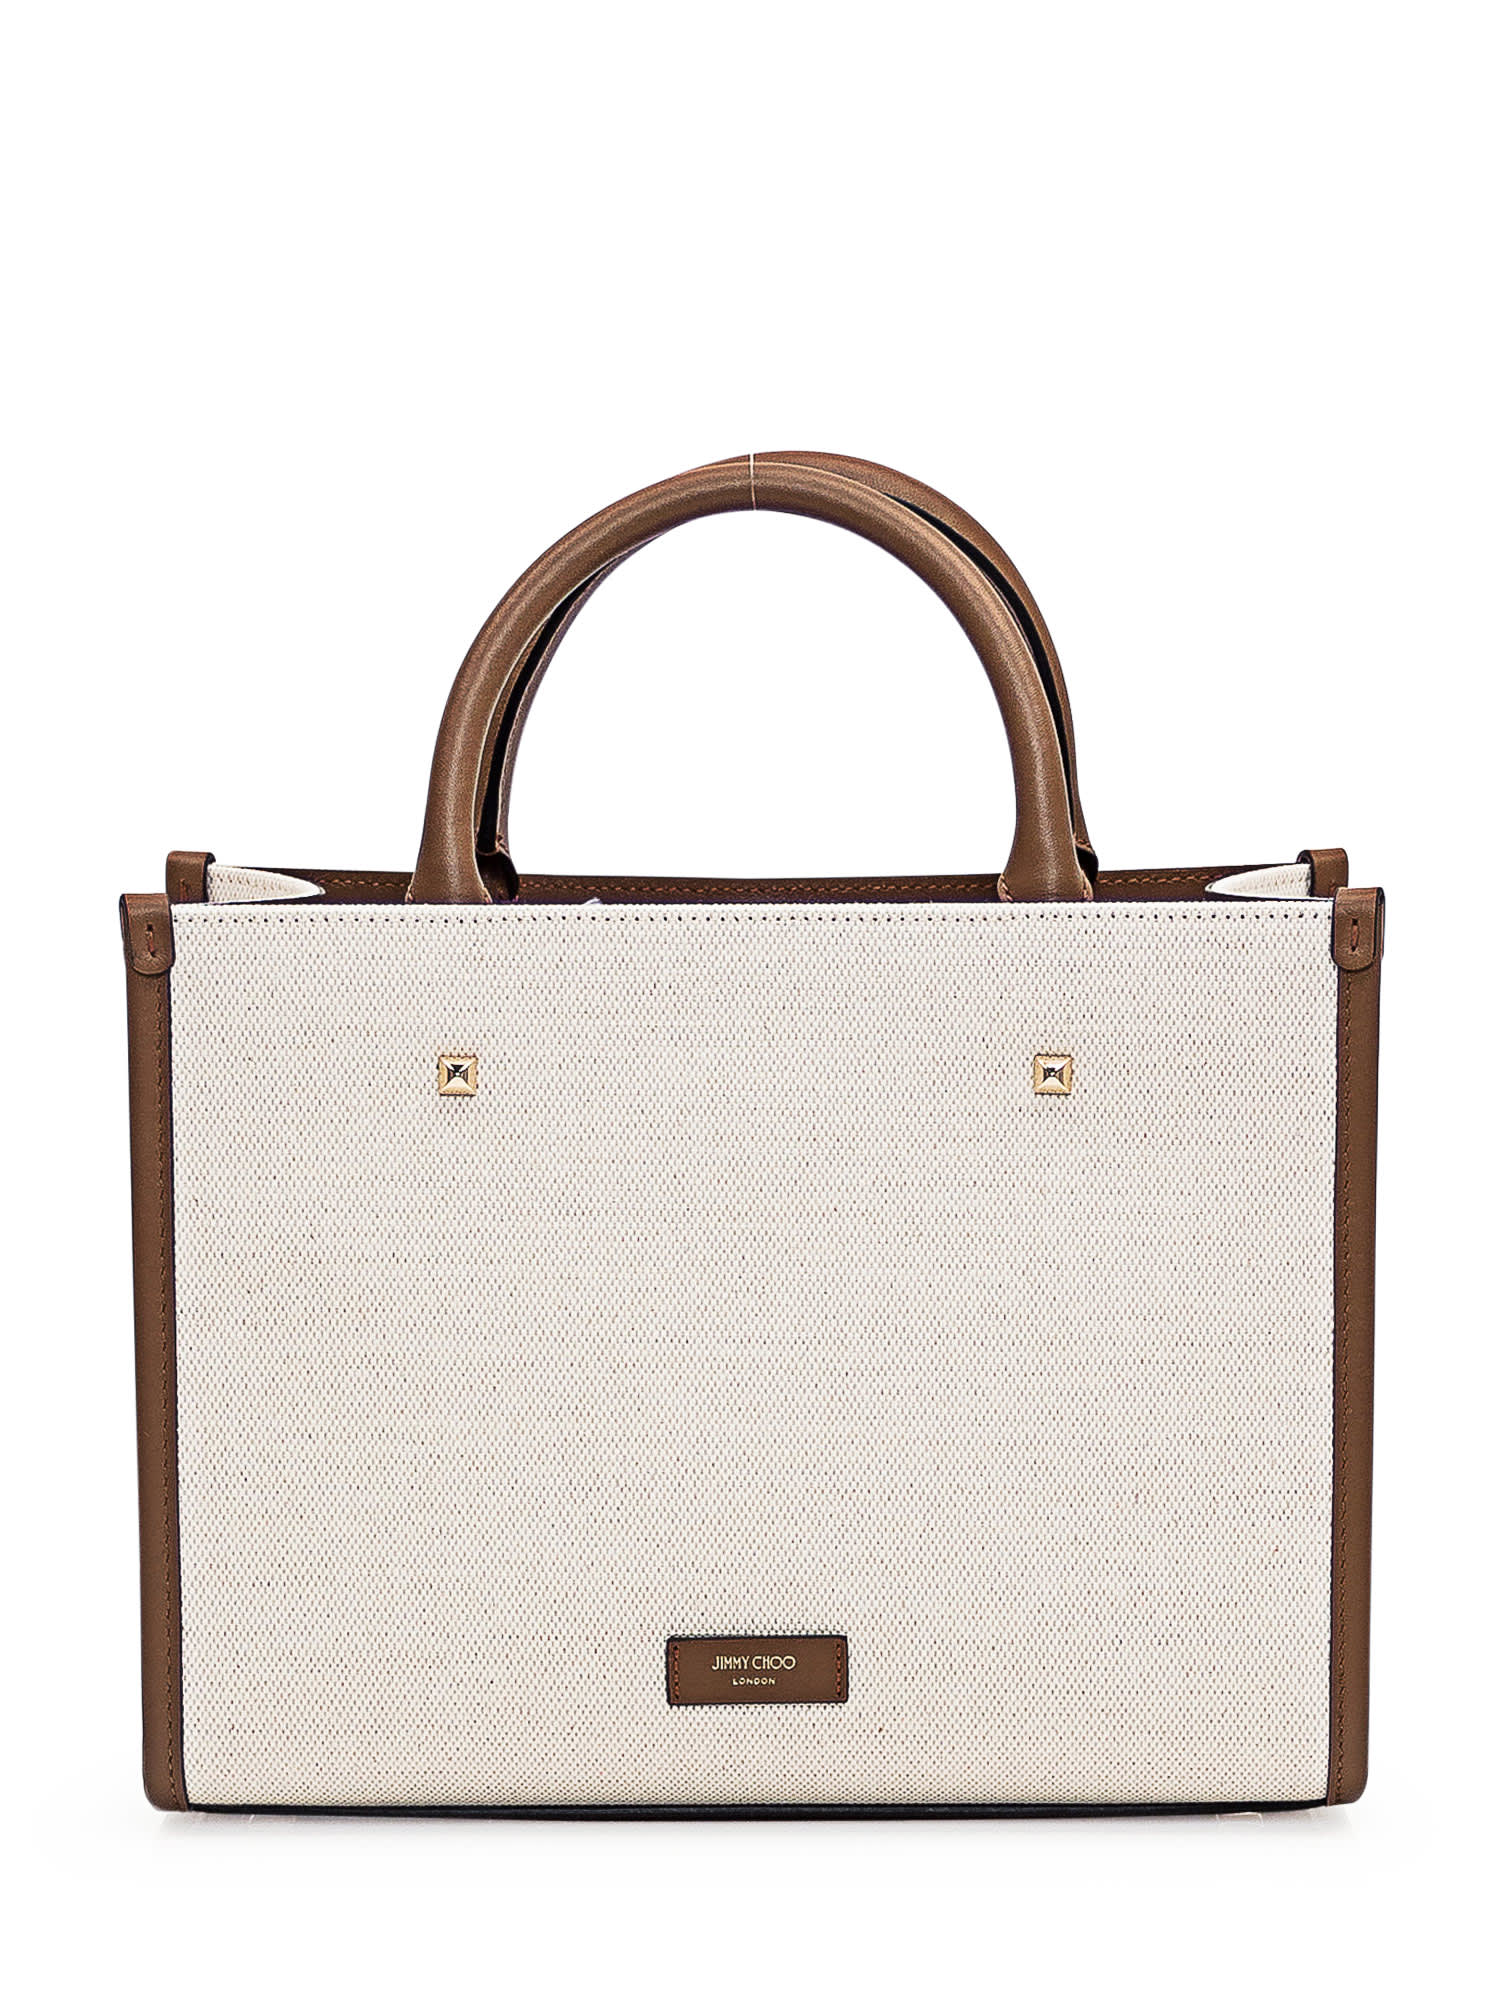 Shop Jimmy Choo Avenue S Tote Bag In Natural/taupe/dark Tan/light Gold